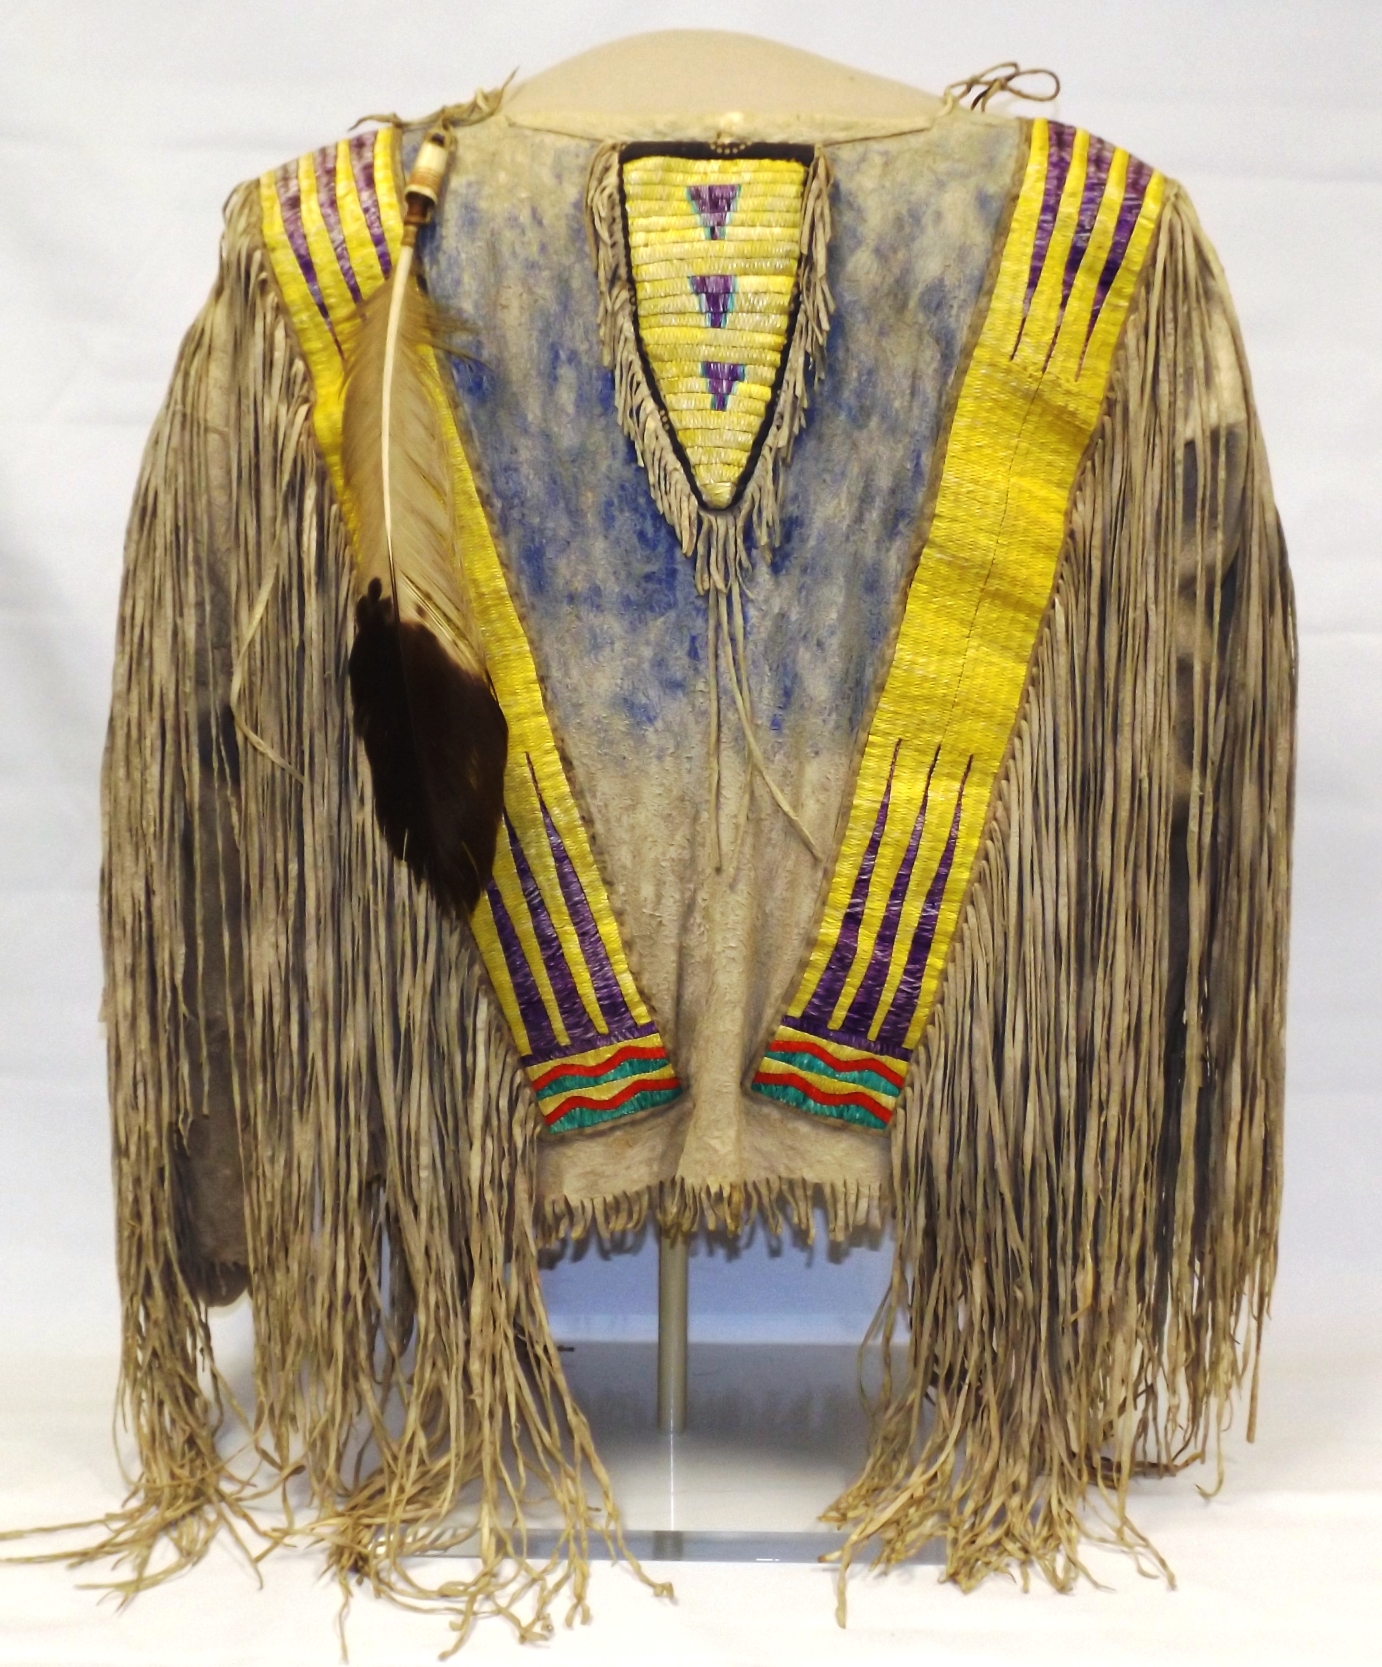 This buckskin shirt decorated with quills was worn by Red Cloud.